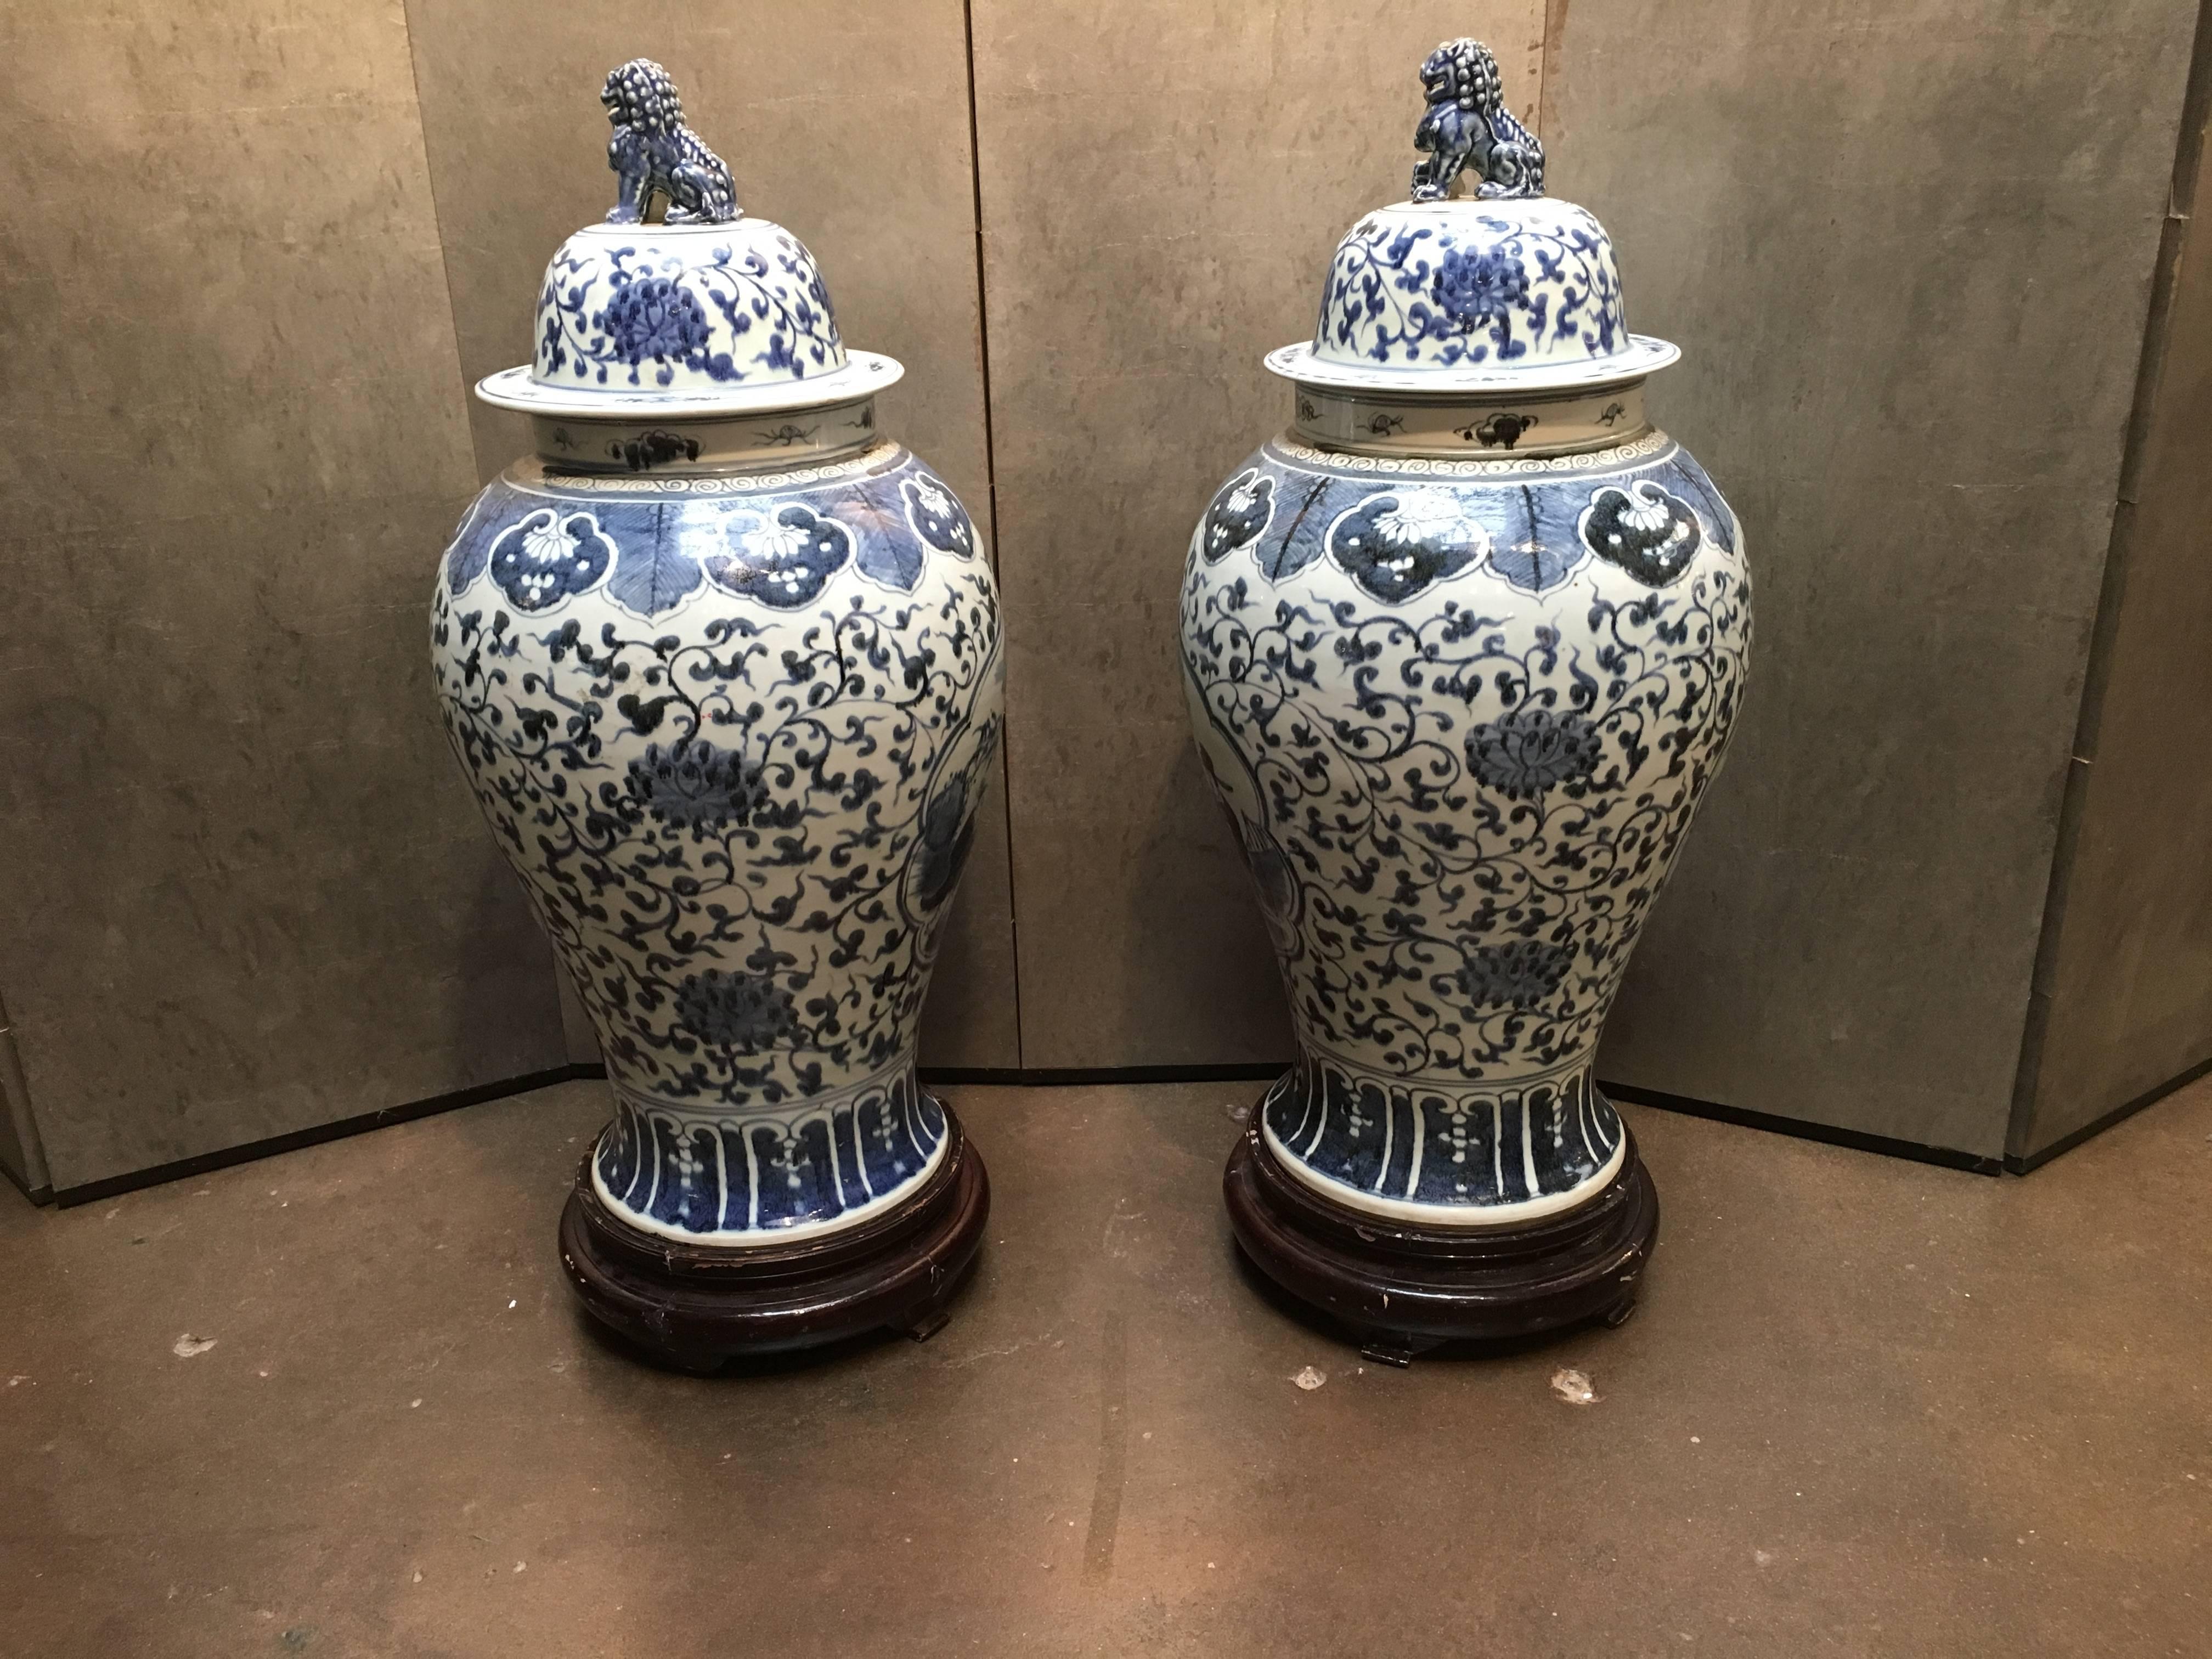 A pair of Chinese blue and white elegant, well proportioned, large scale covered baluster jars. Each with a splayed foot and low, slender waist rising up to a full body, along with broad shoulders which give way to a short, wide neck supporting the